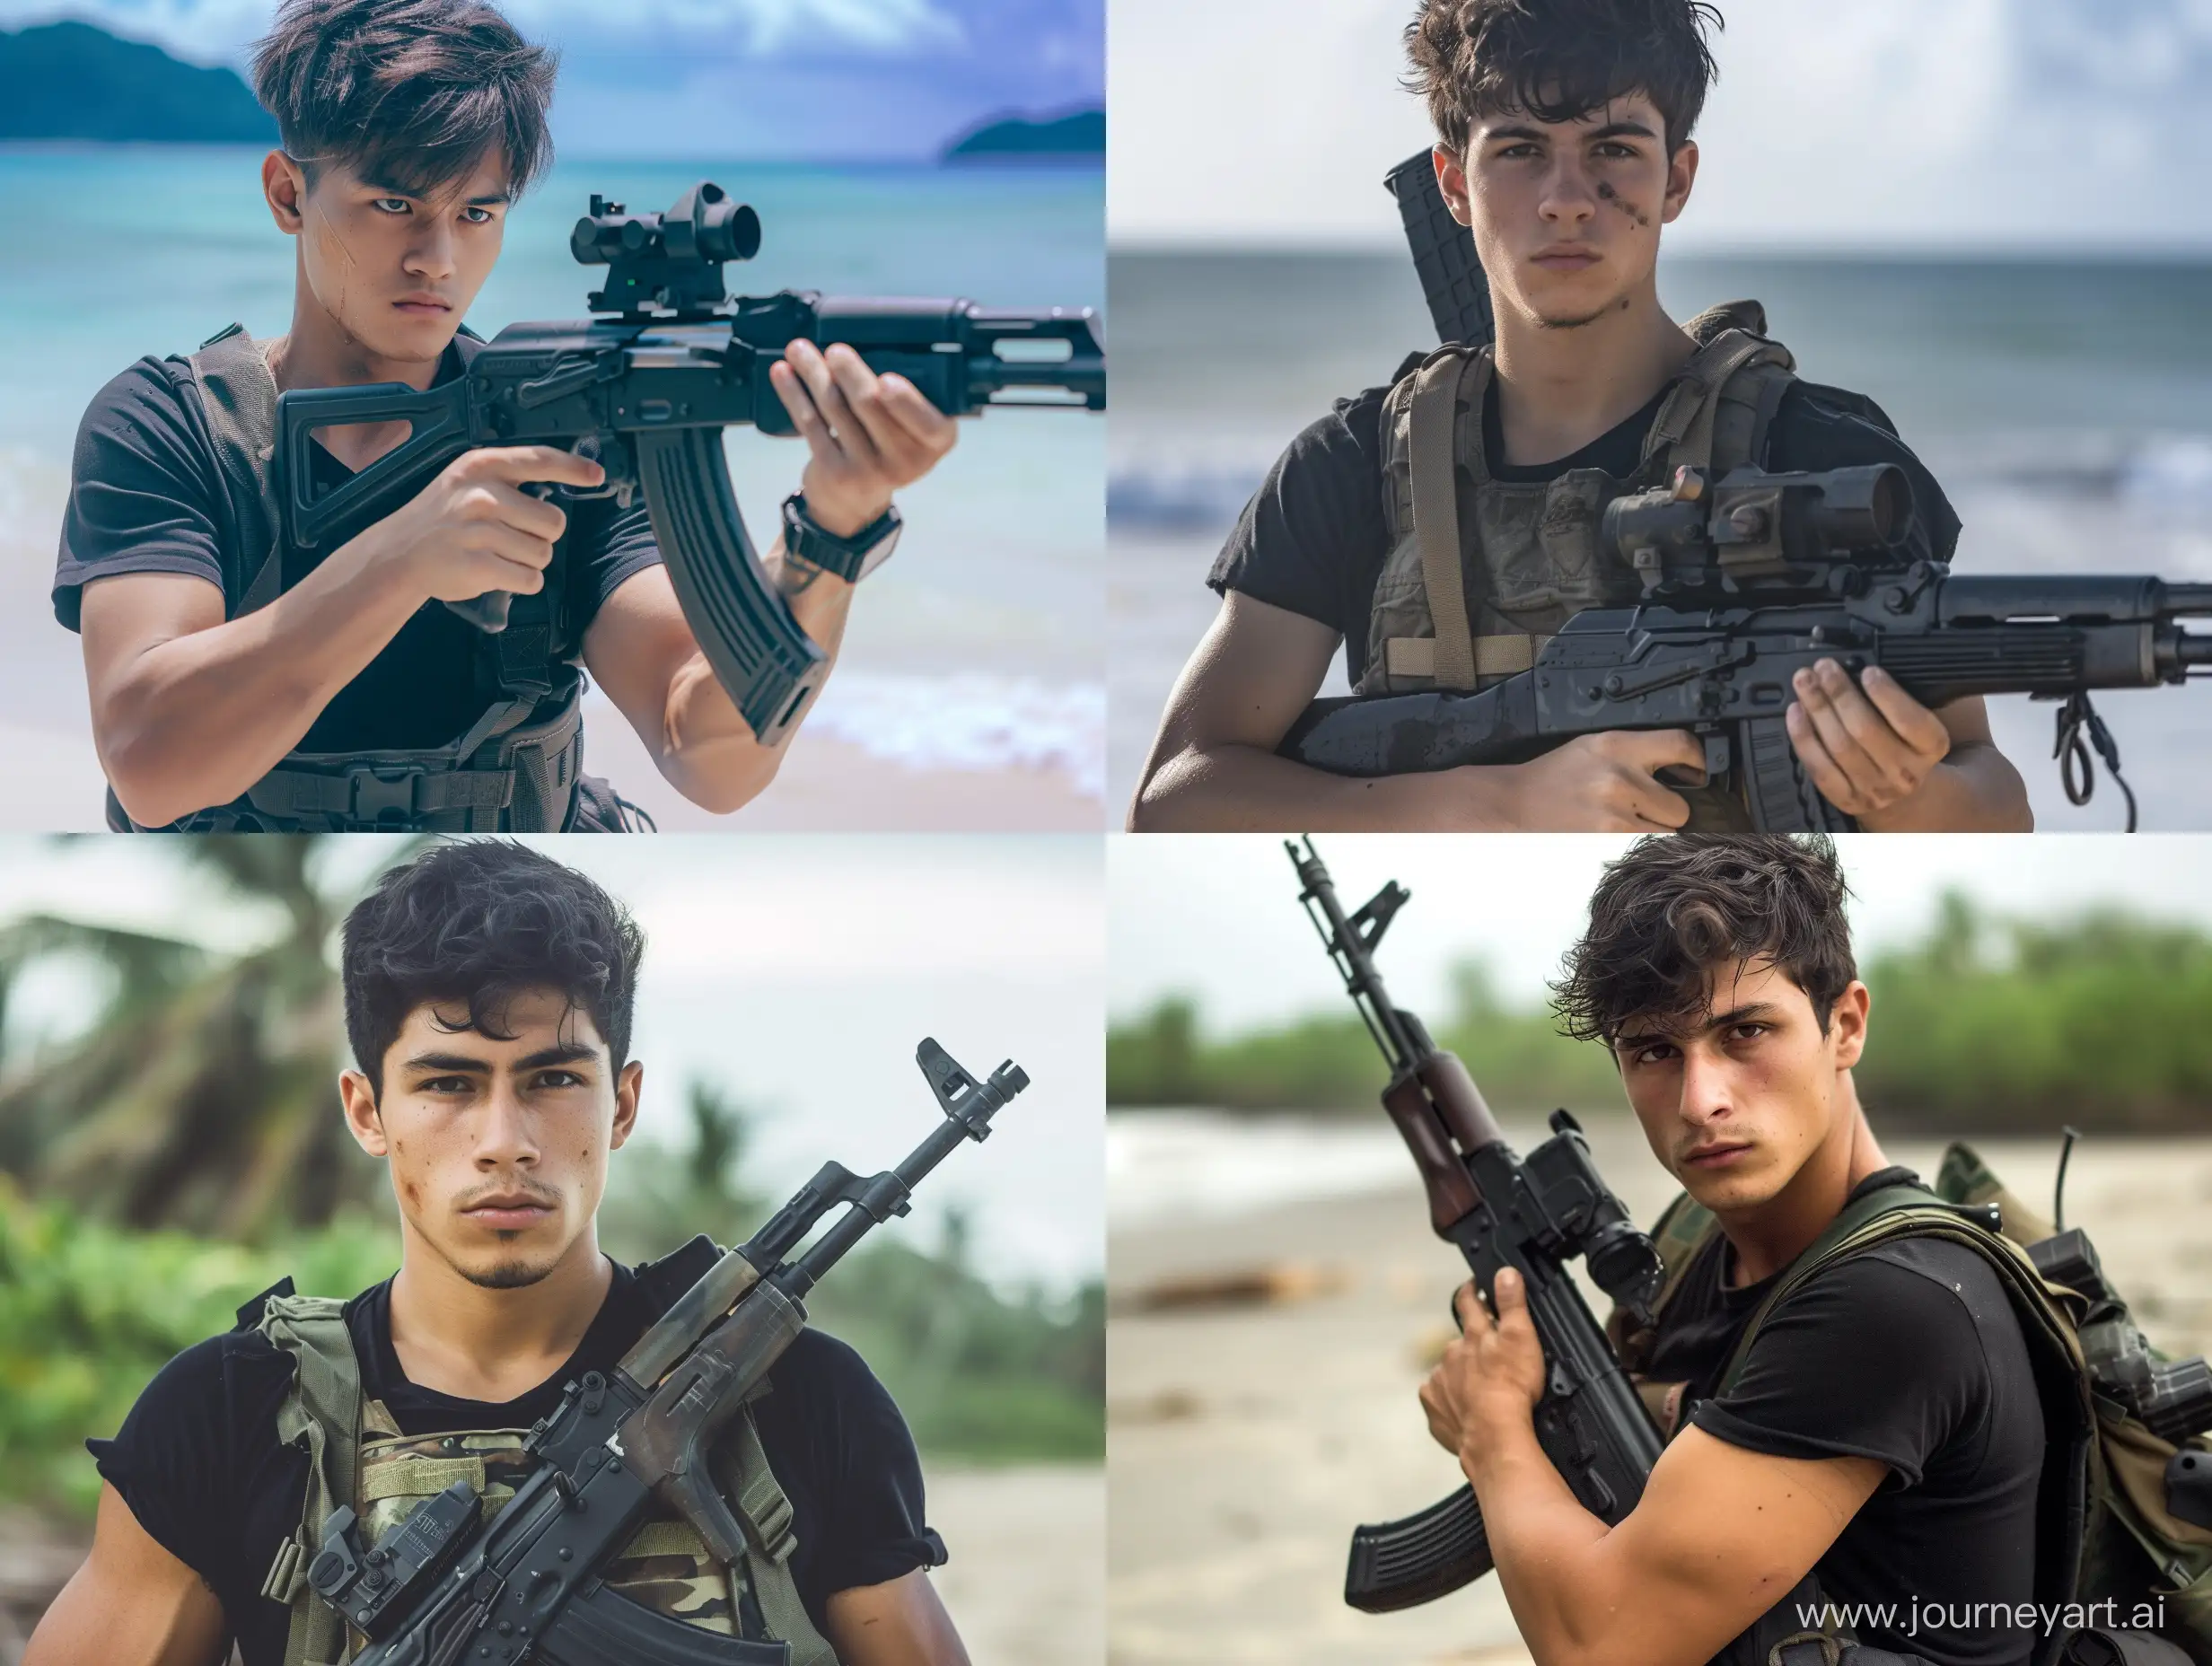 Young-Bandicoot-with-Dark-Hair-Wearing-Black-Tshirt-and-Bulletproof-Vest-Holding-AK12-with-OKP7-Sight-on-Island